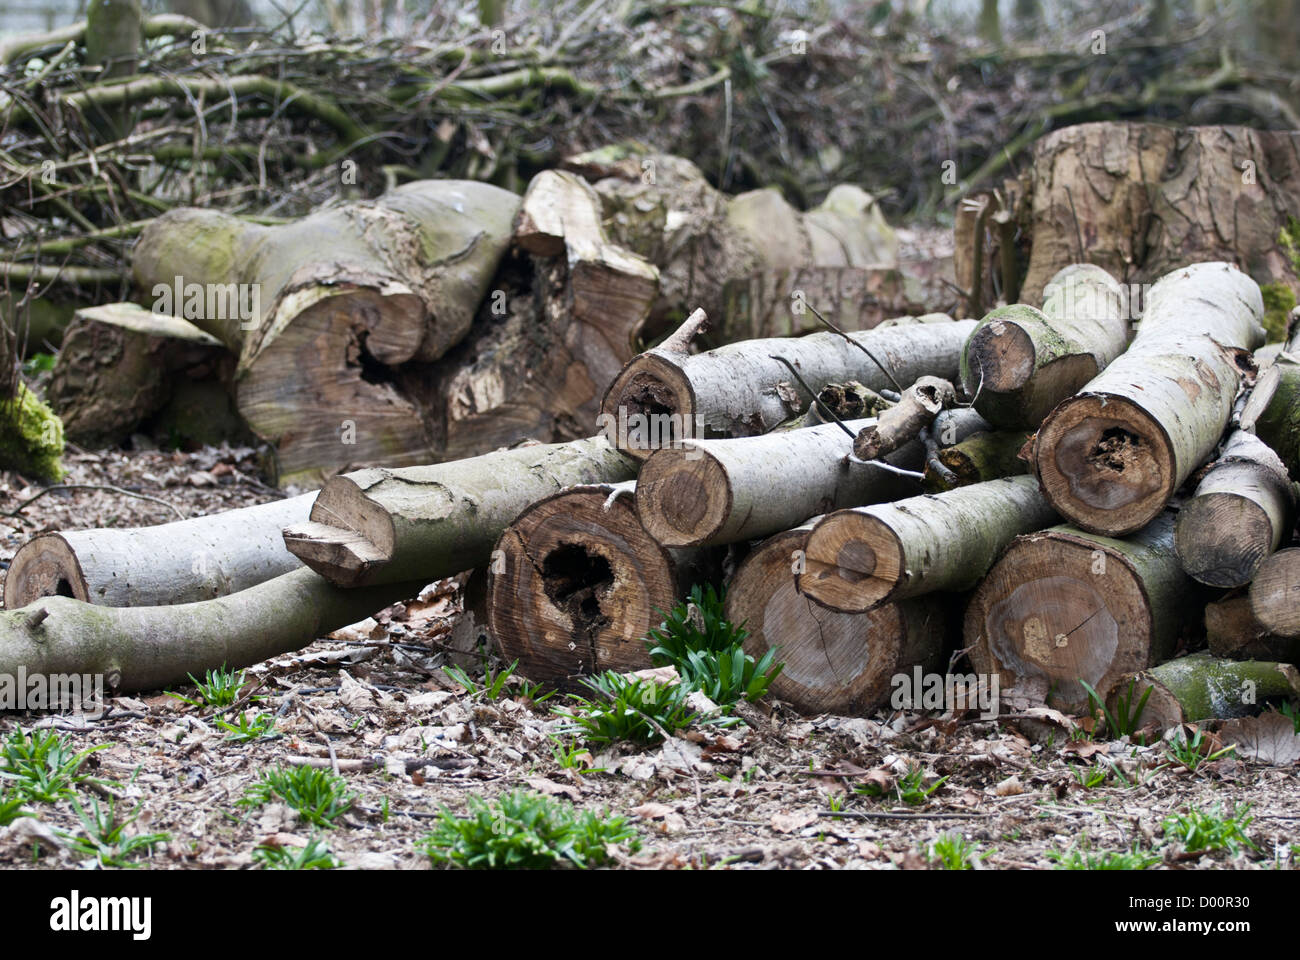 Recently felled and cut up trees in Rufford Country park, Nottinghamshire, England, UK. Stock Photo